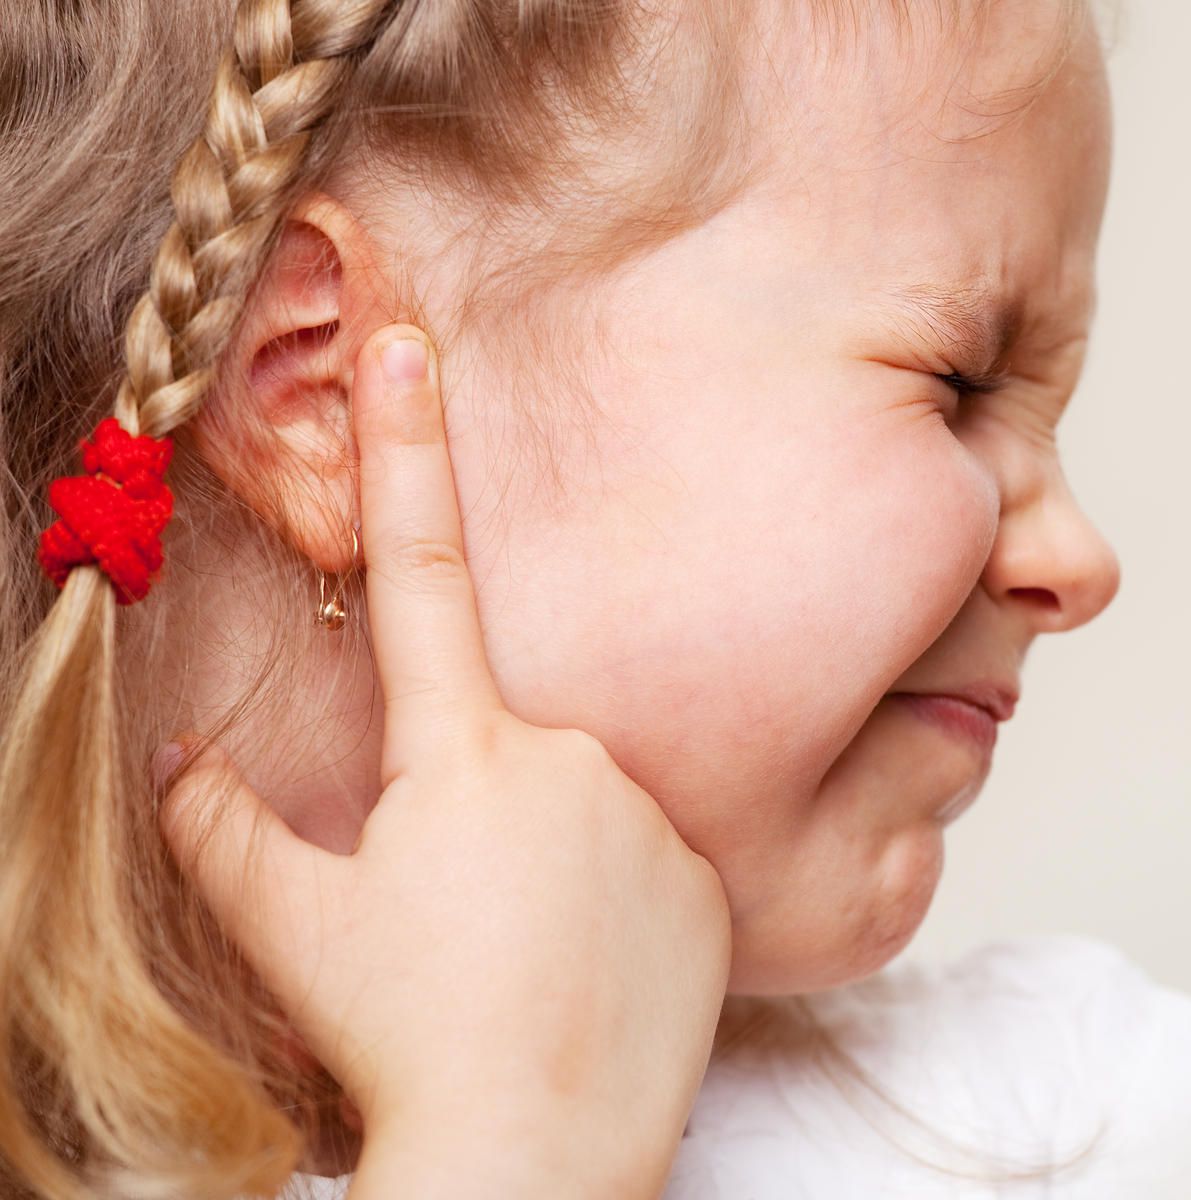 Girl suffering from ear infection and experiencing pain